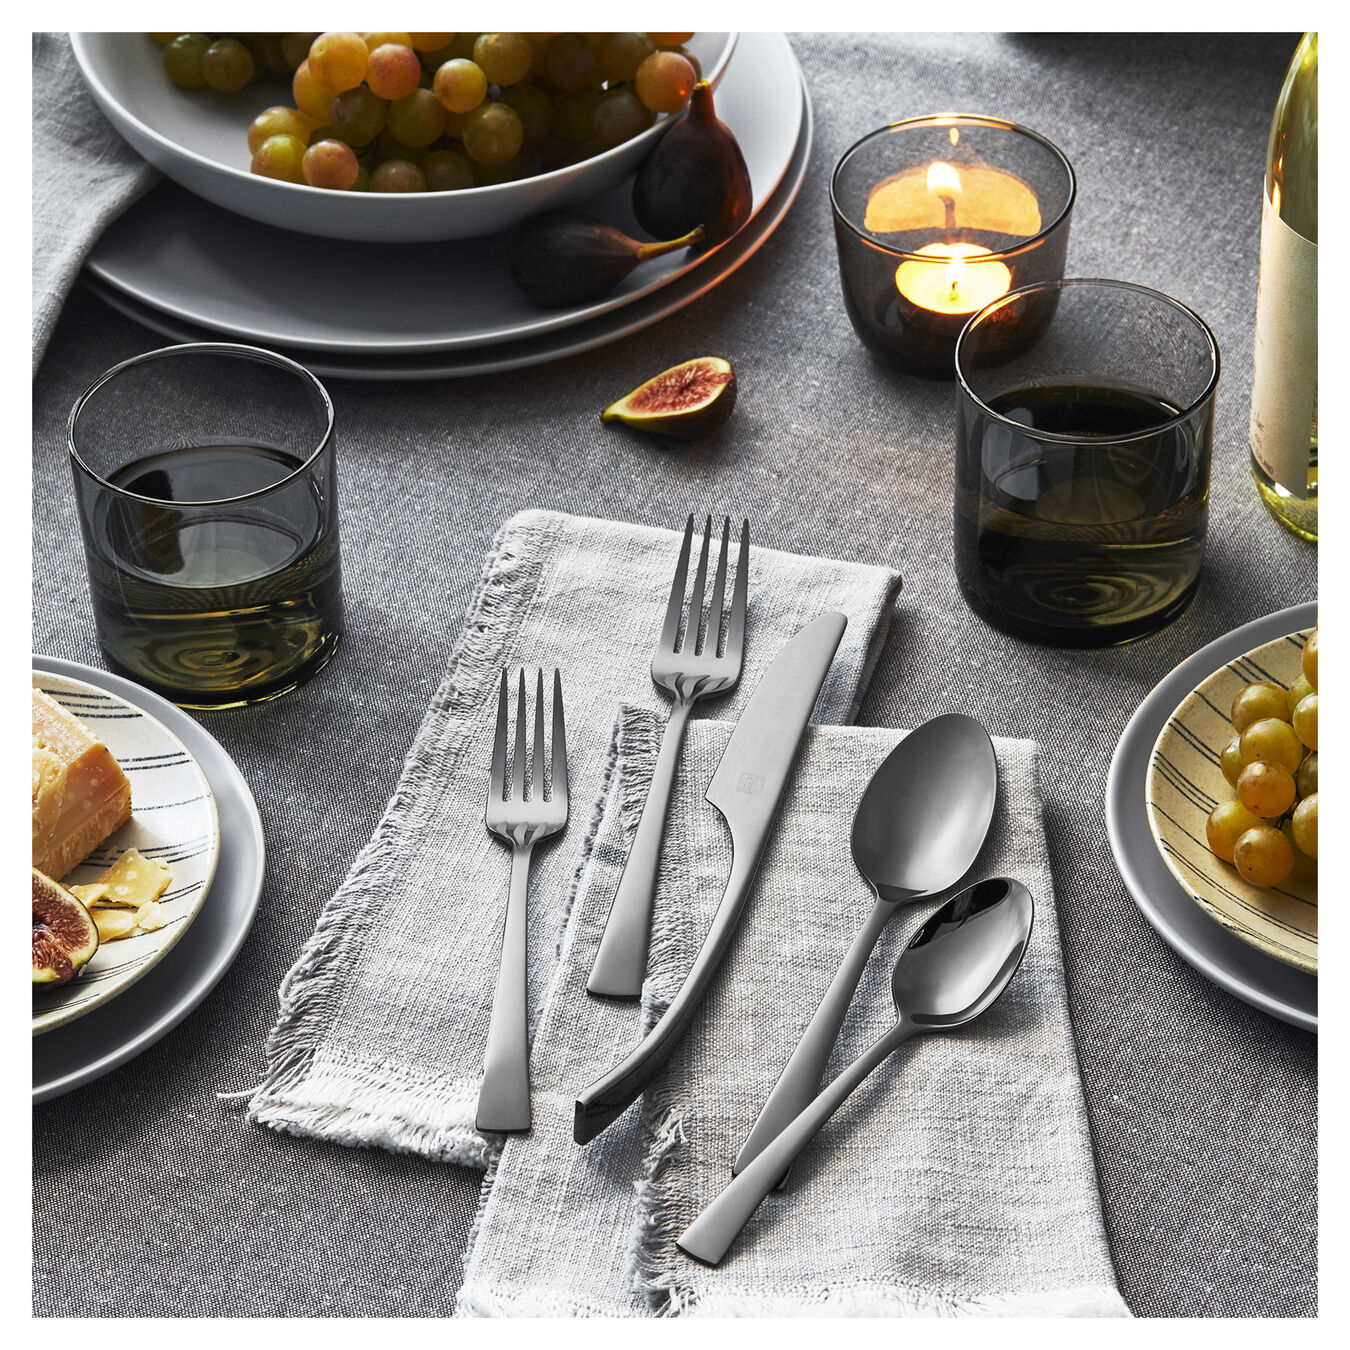 5 pieces of bellasera slate flatware displayed in a table setting next to dinner plates, drinking glasses, bowl of grapes, and light gray napkins on a dark gray placemat